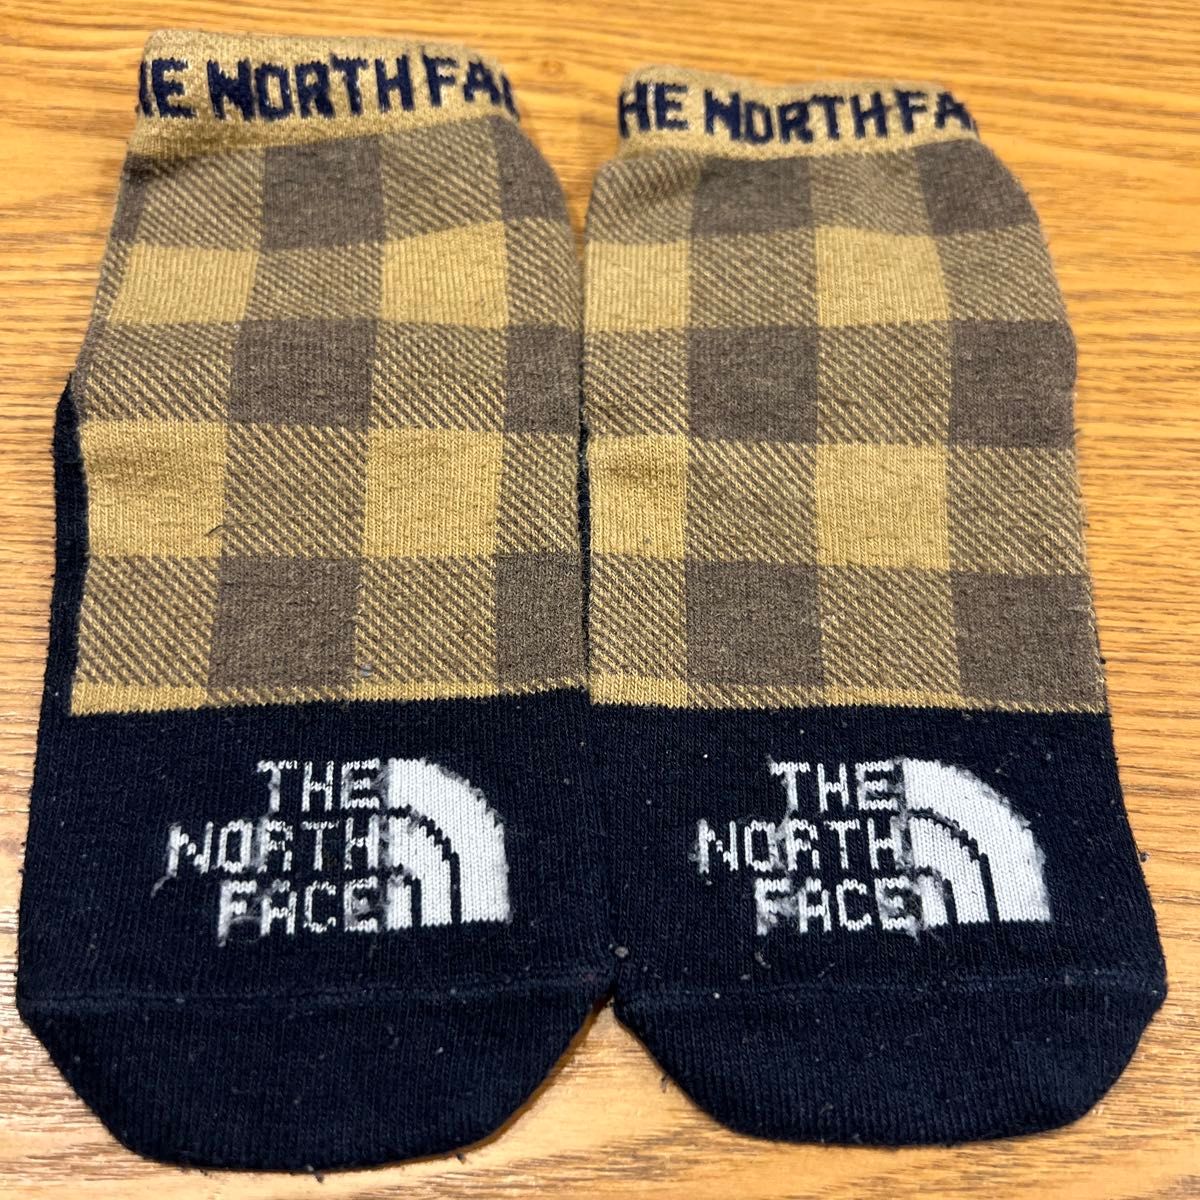 the North face キッズ 靴下